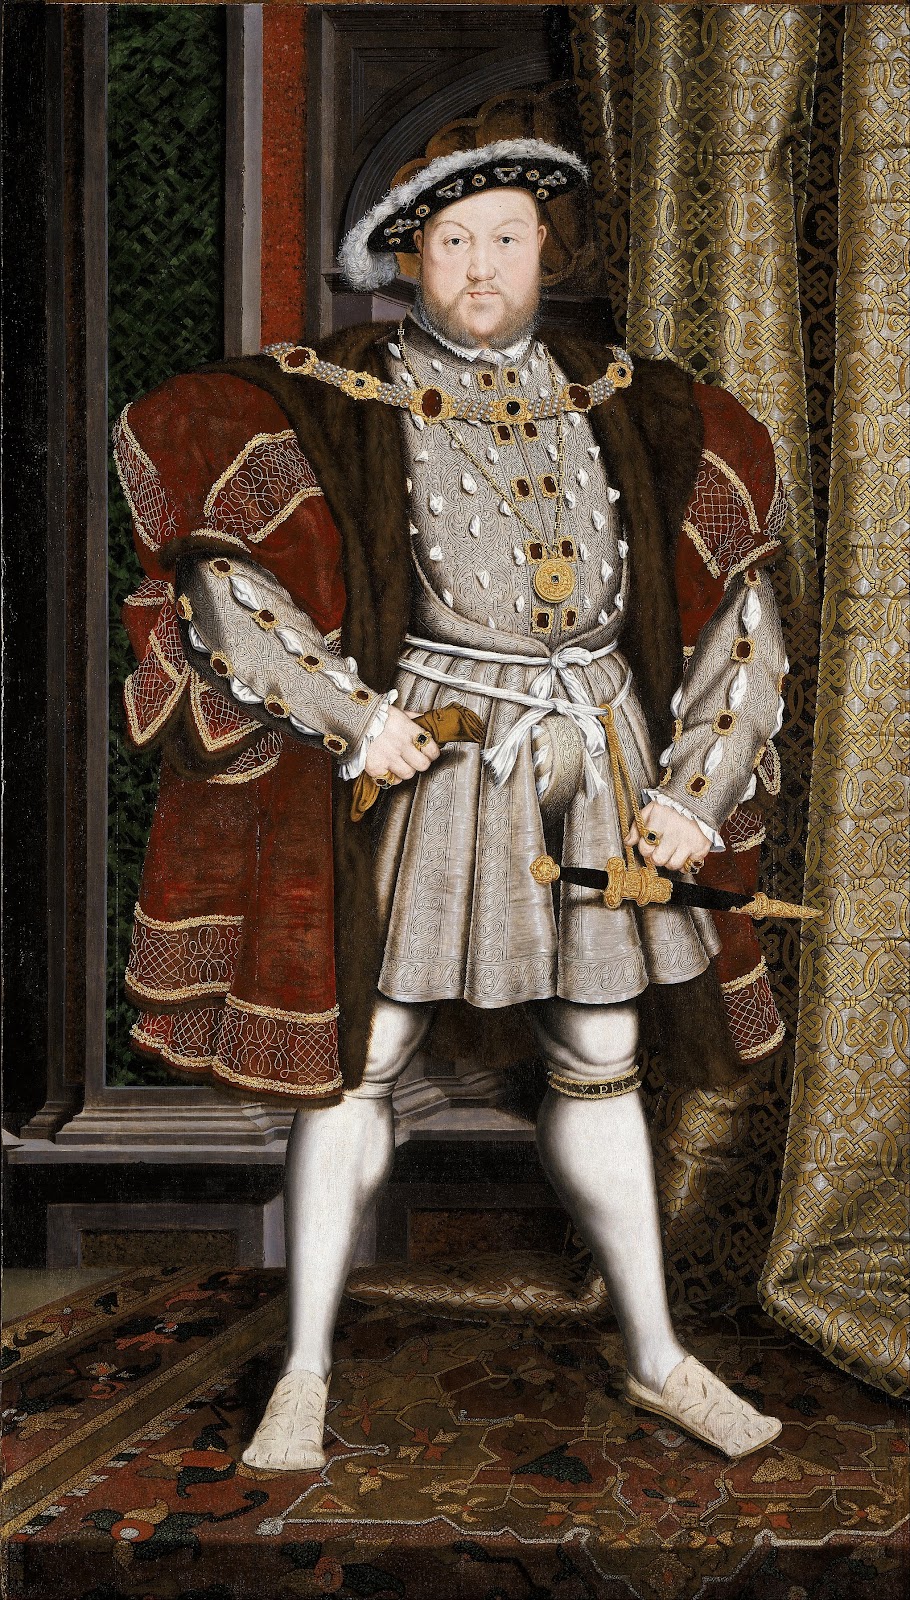 Portrait of Henry VIII in his robes of office looking very pleased with himself.